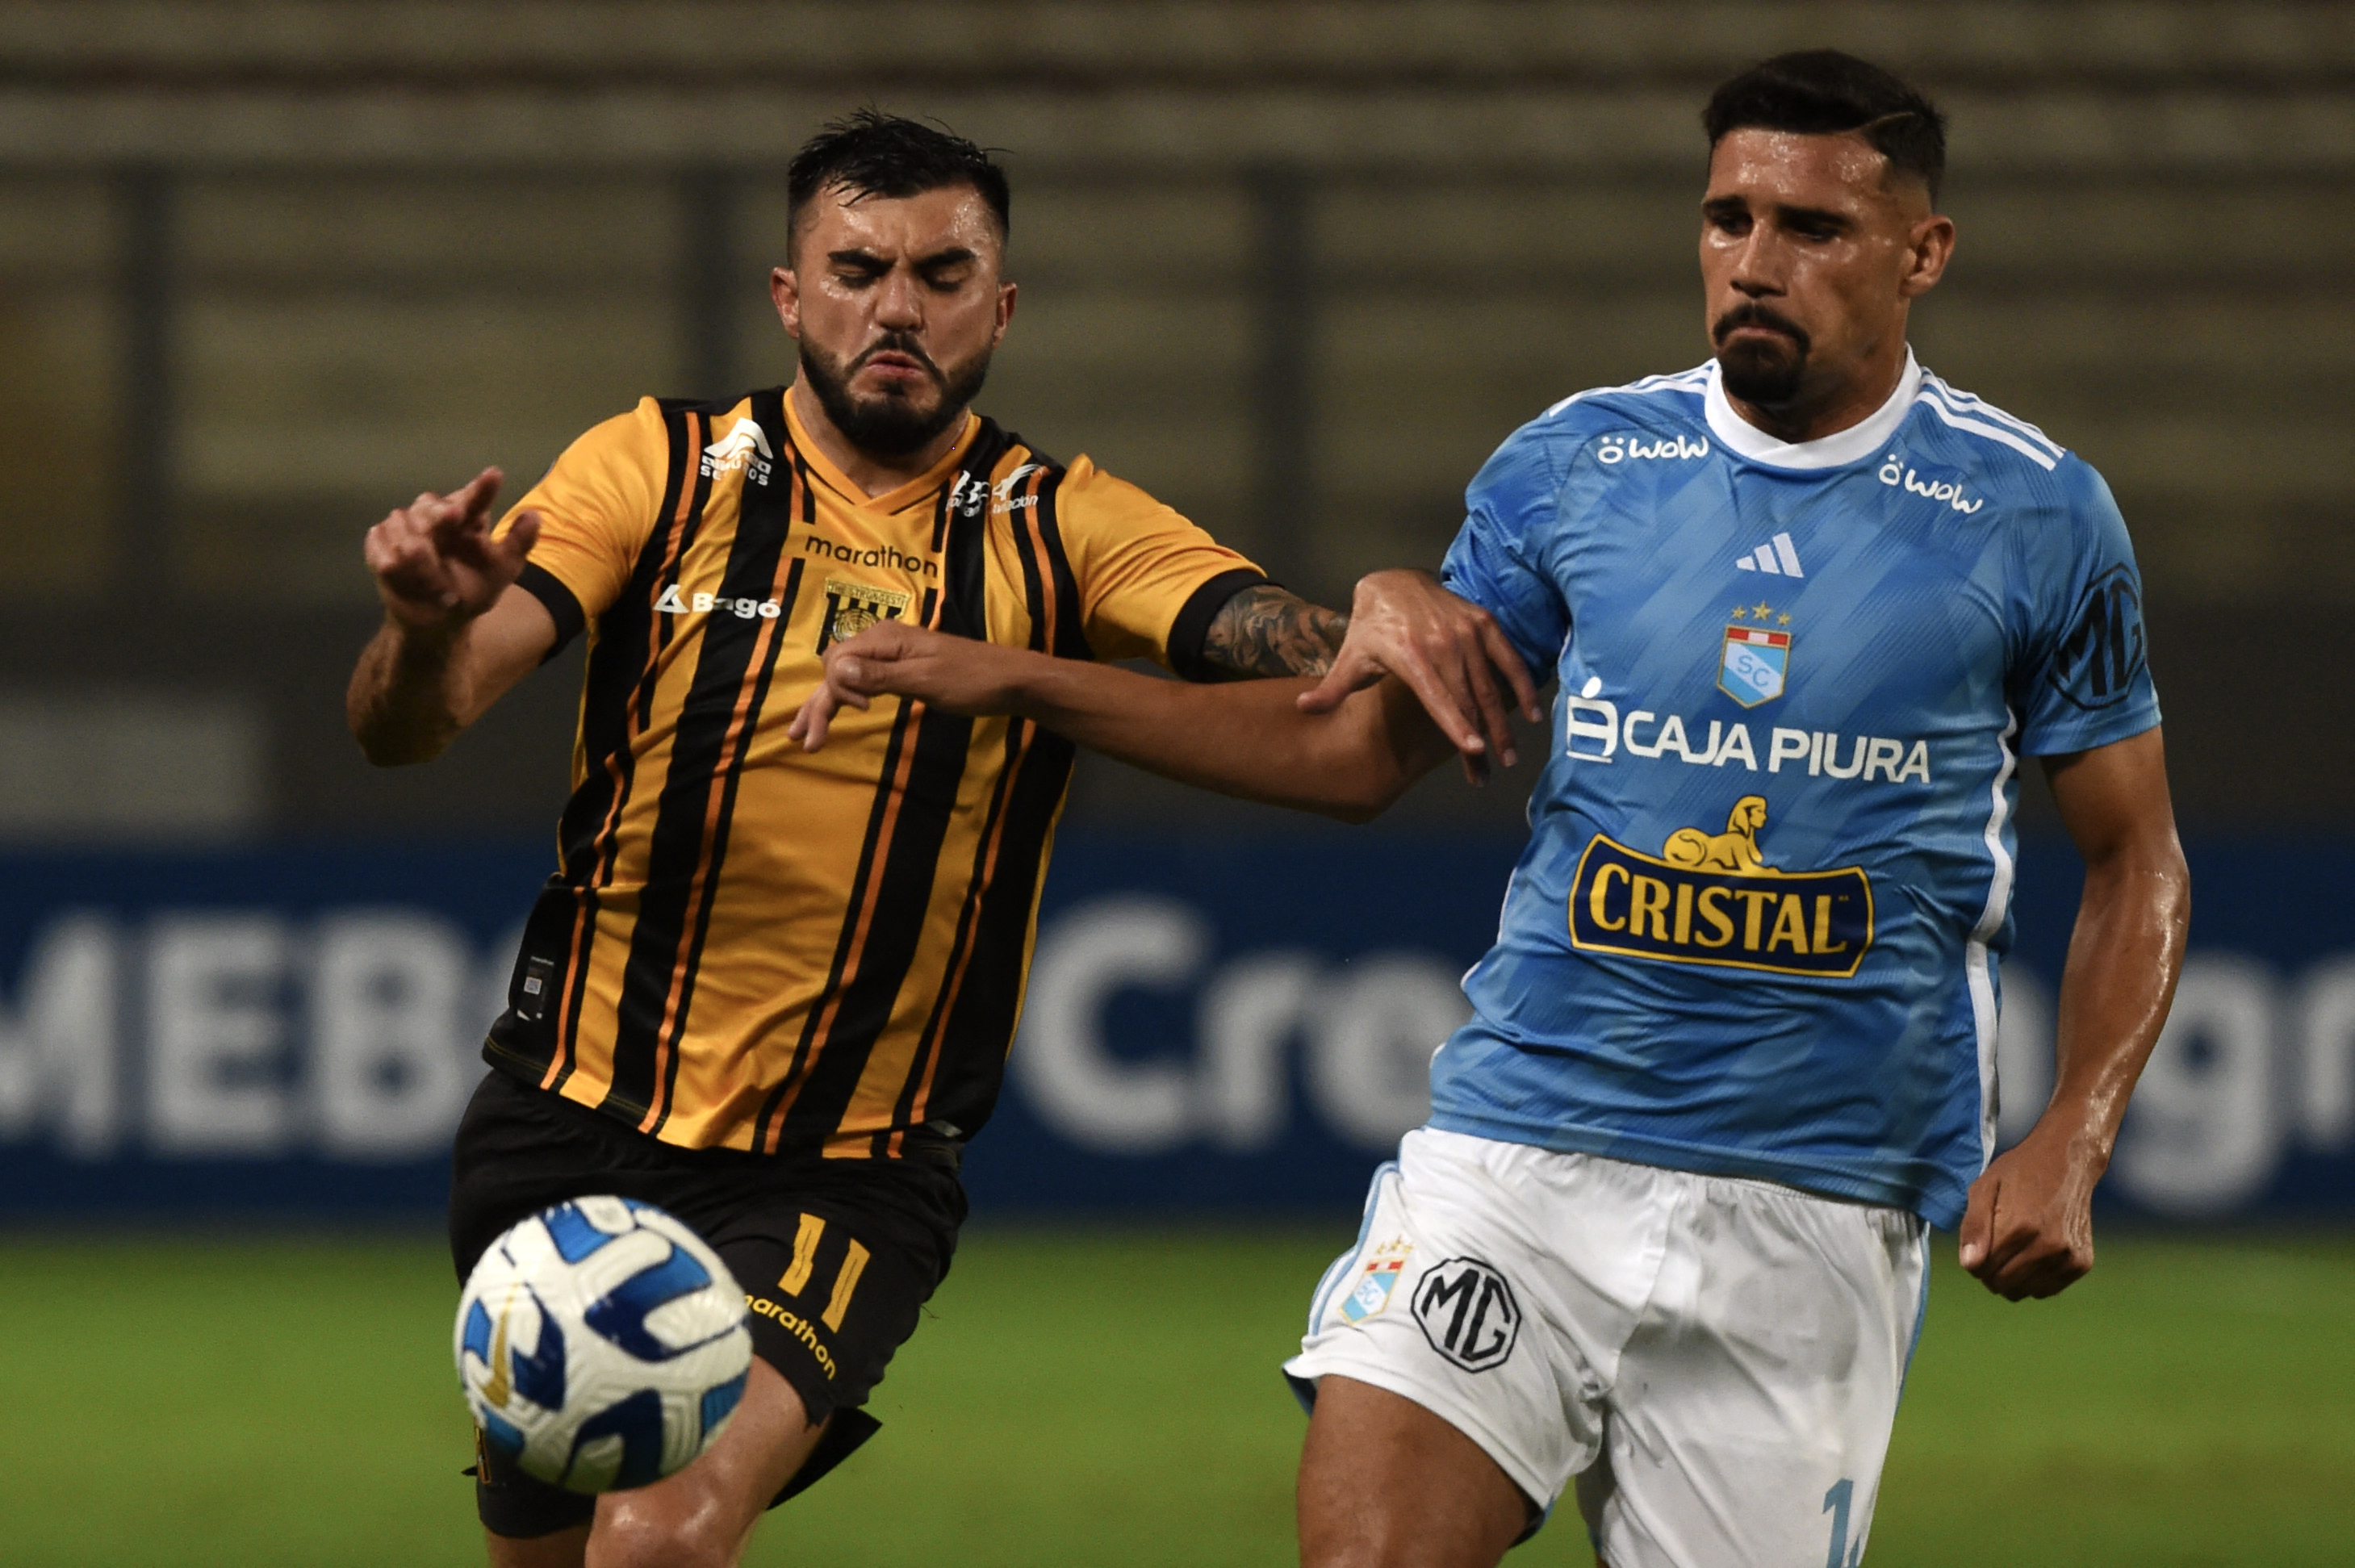 The strongest sporting cristal